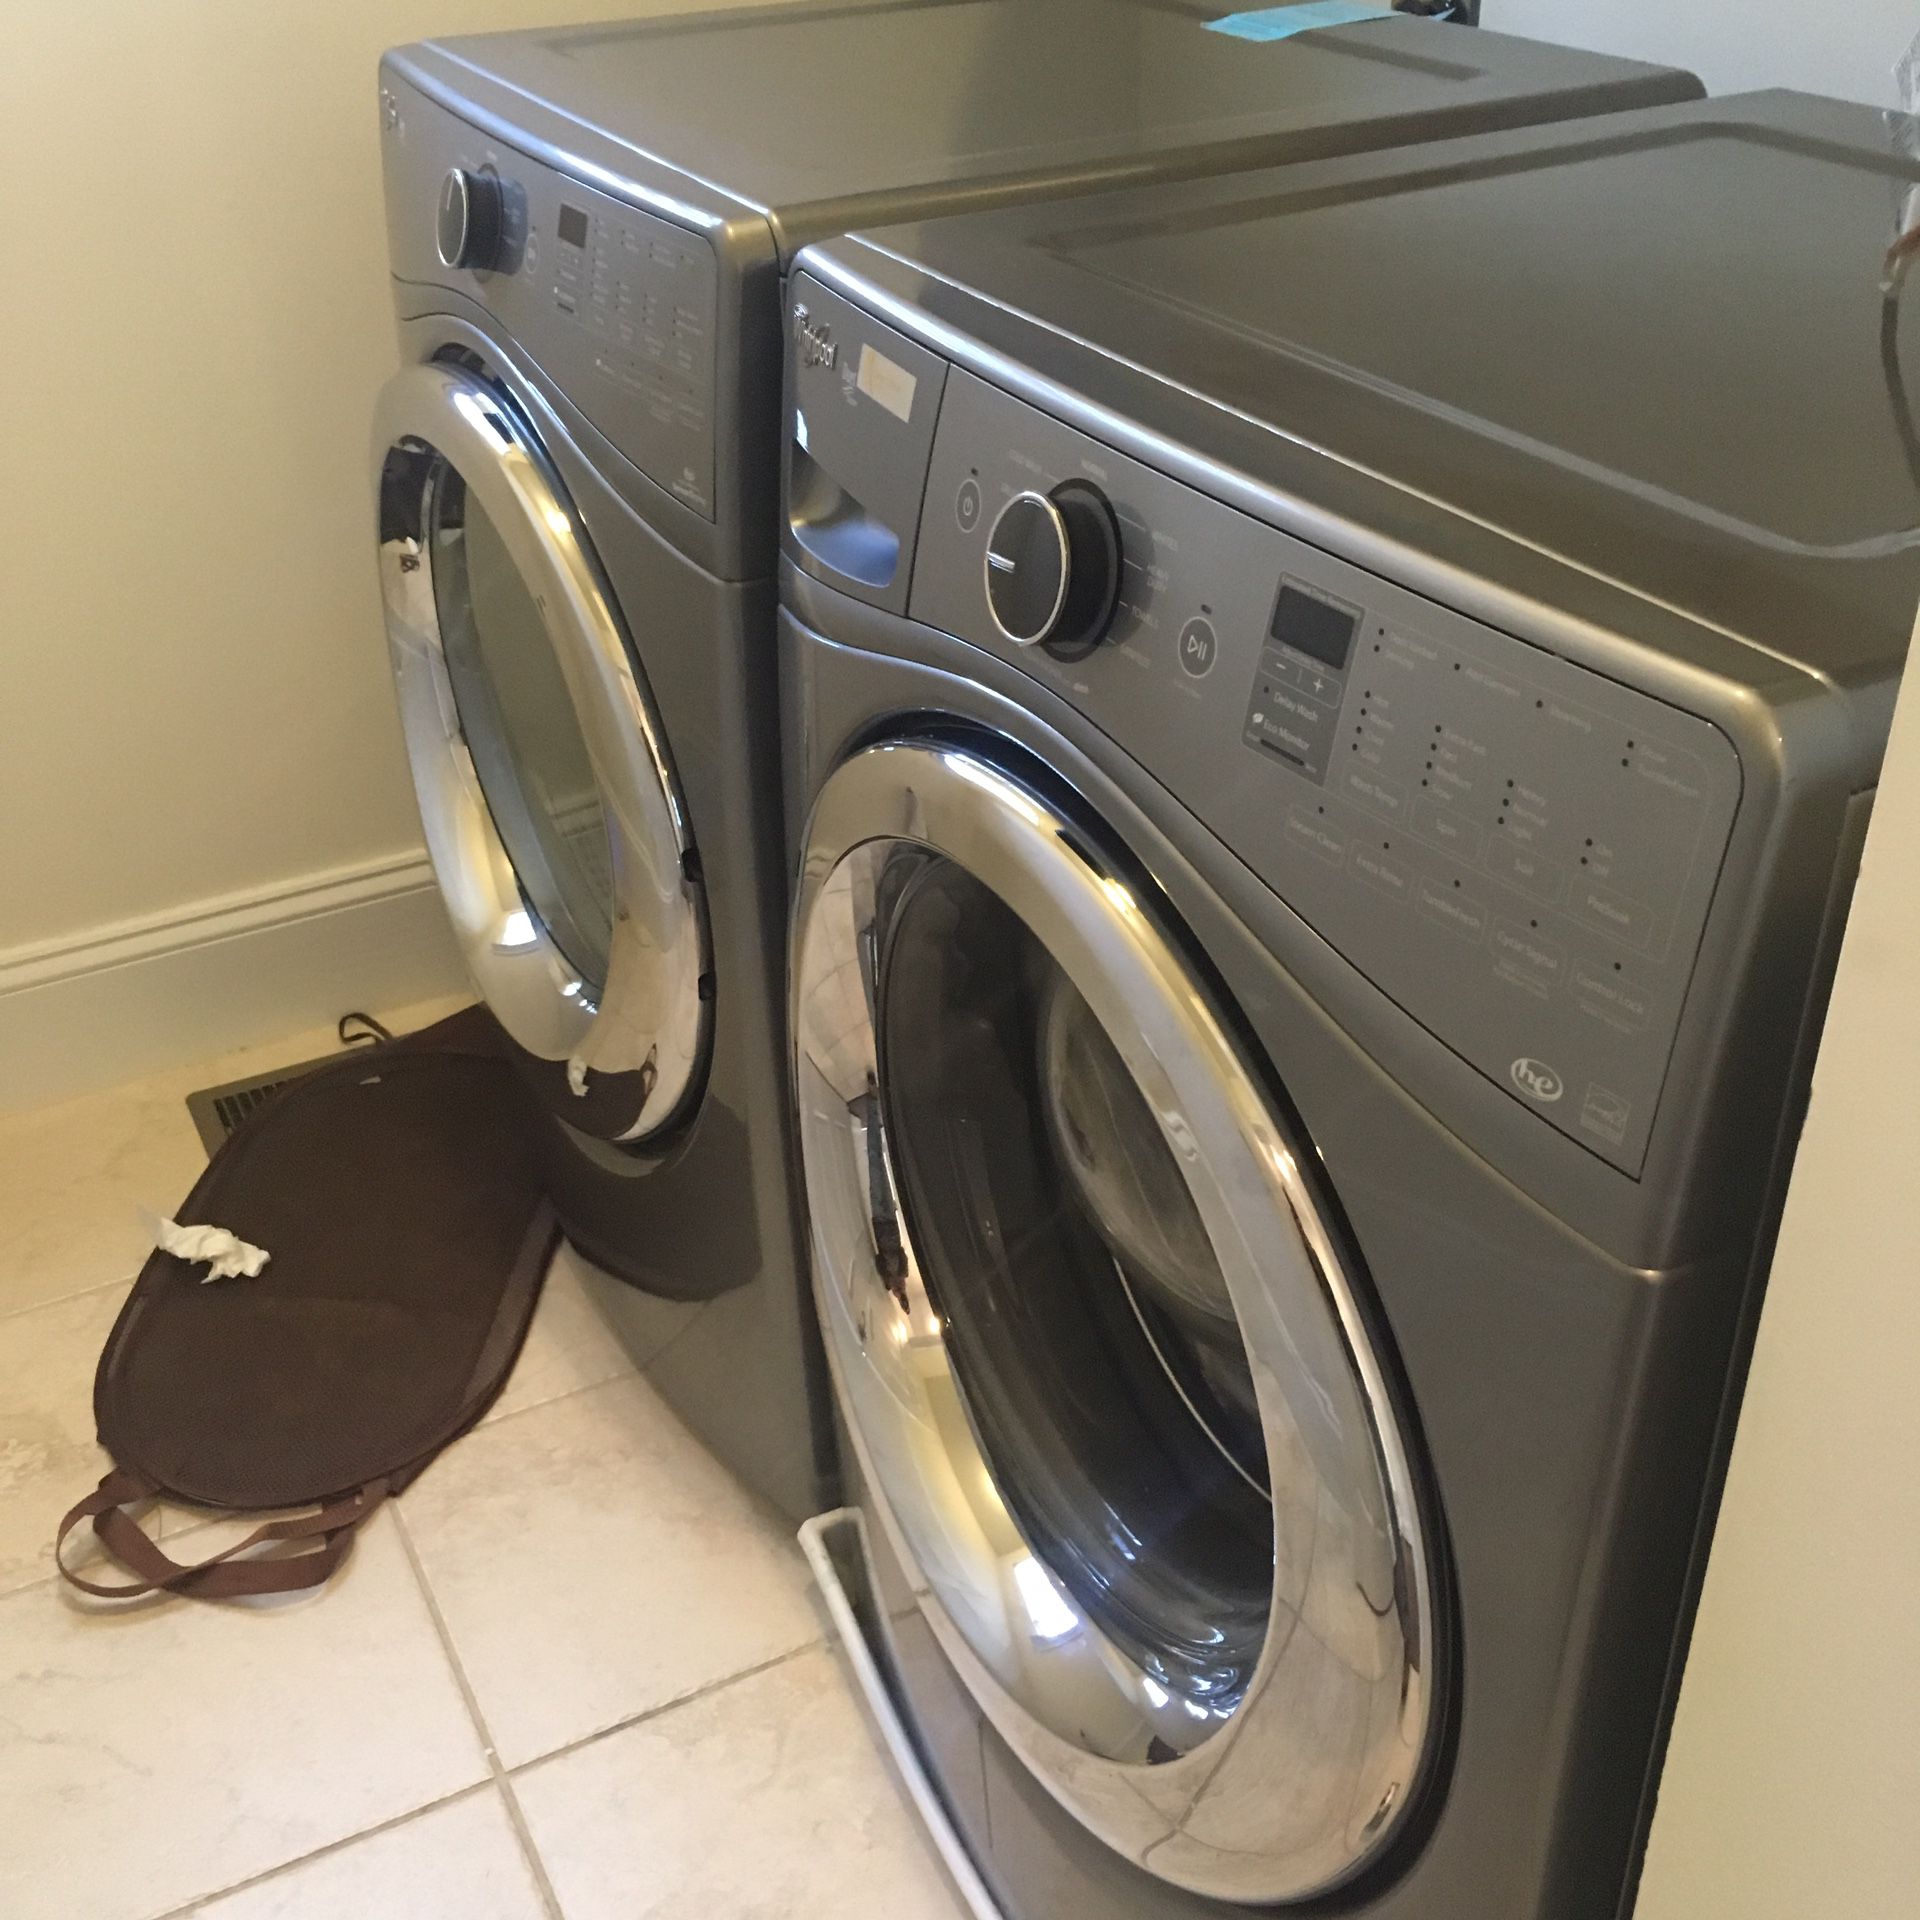 Whirlpool duet steam washer and dryer stackable set Best offer